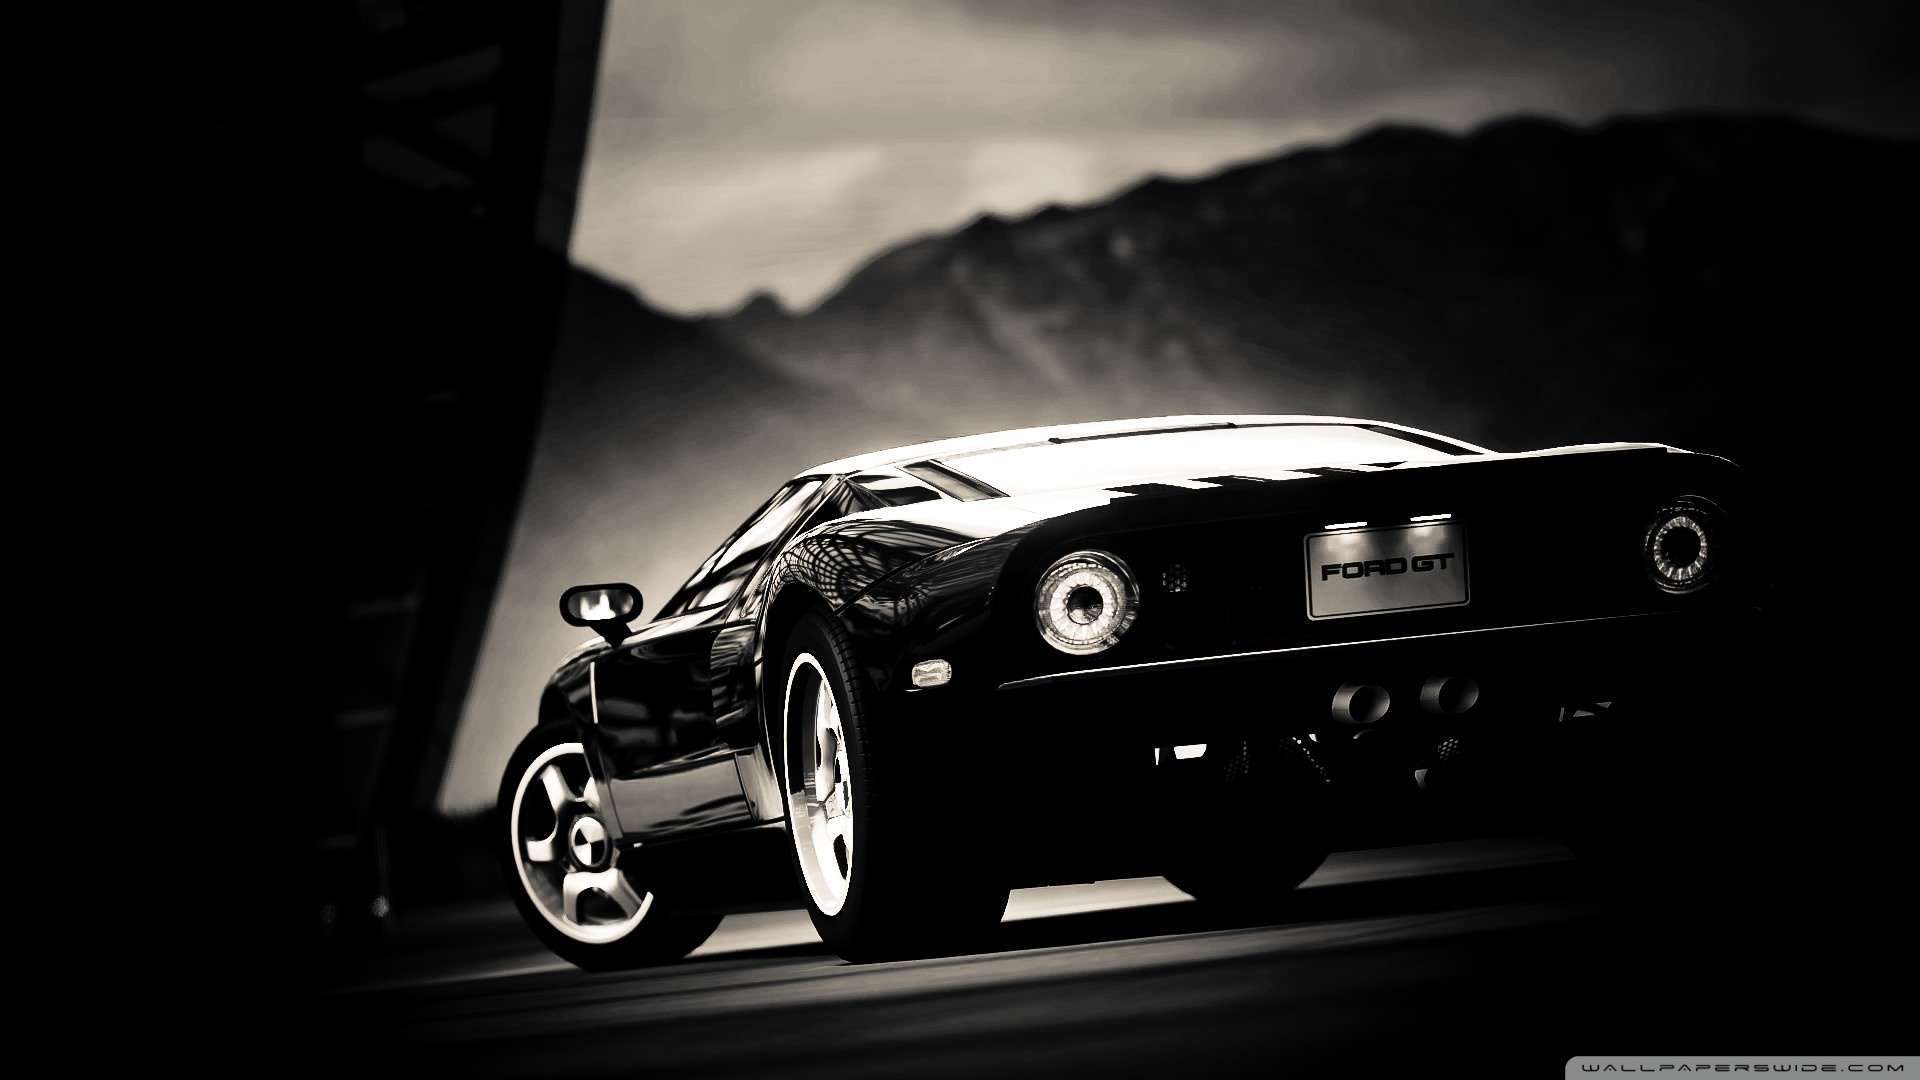 Wallpaper Ford Gt Black 1080p HD Upload At February